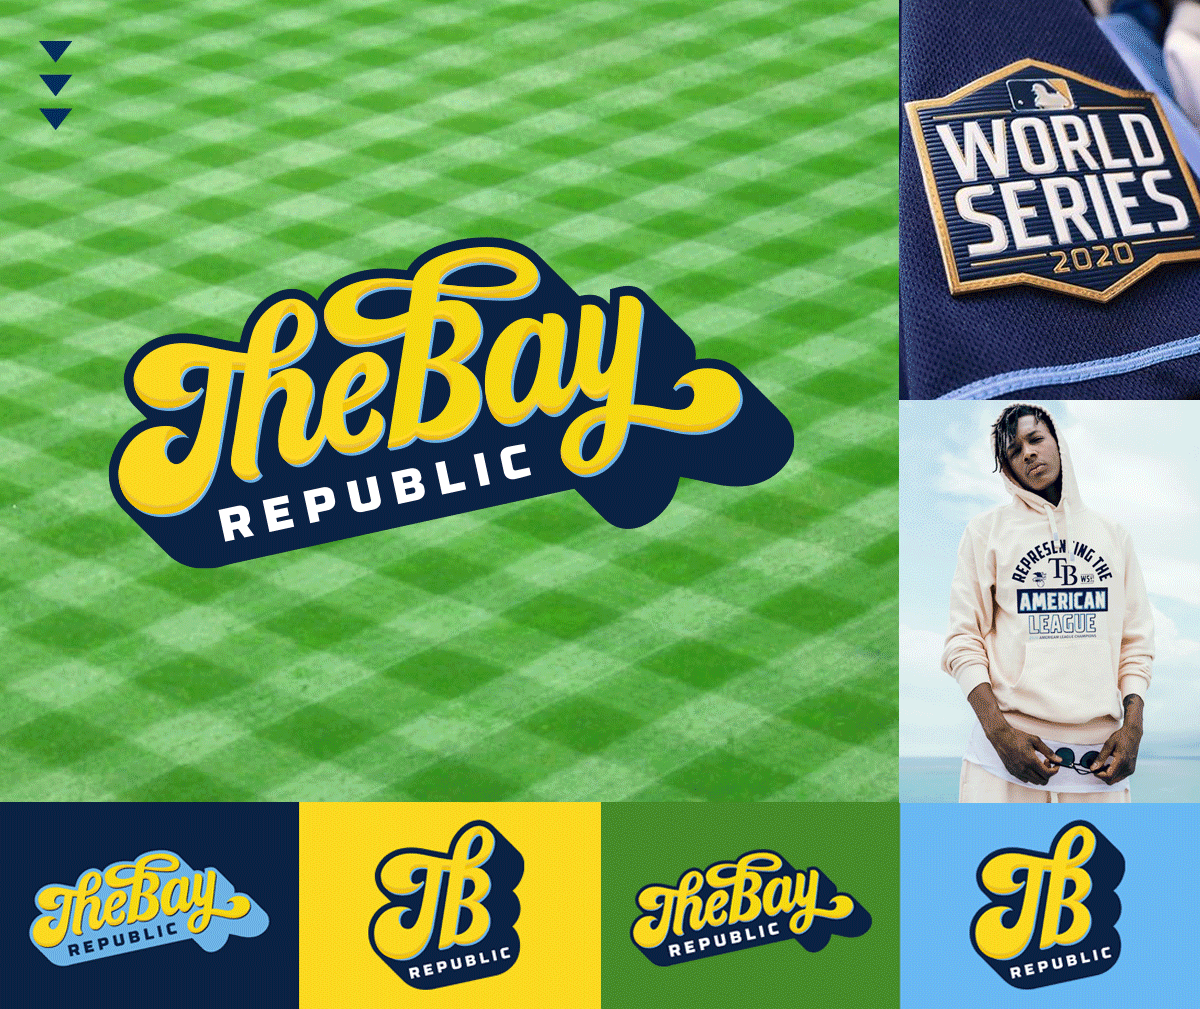 The Bay Republic Brand Identity developed by Justin Winget for the Tampa Bay Rays and Rowdies